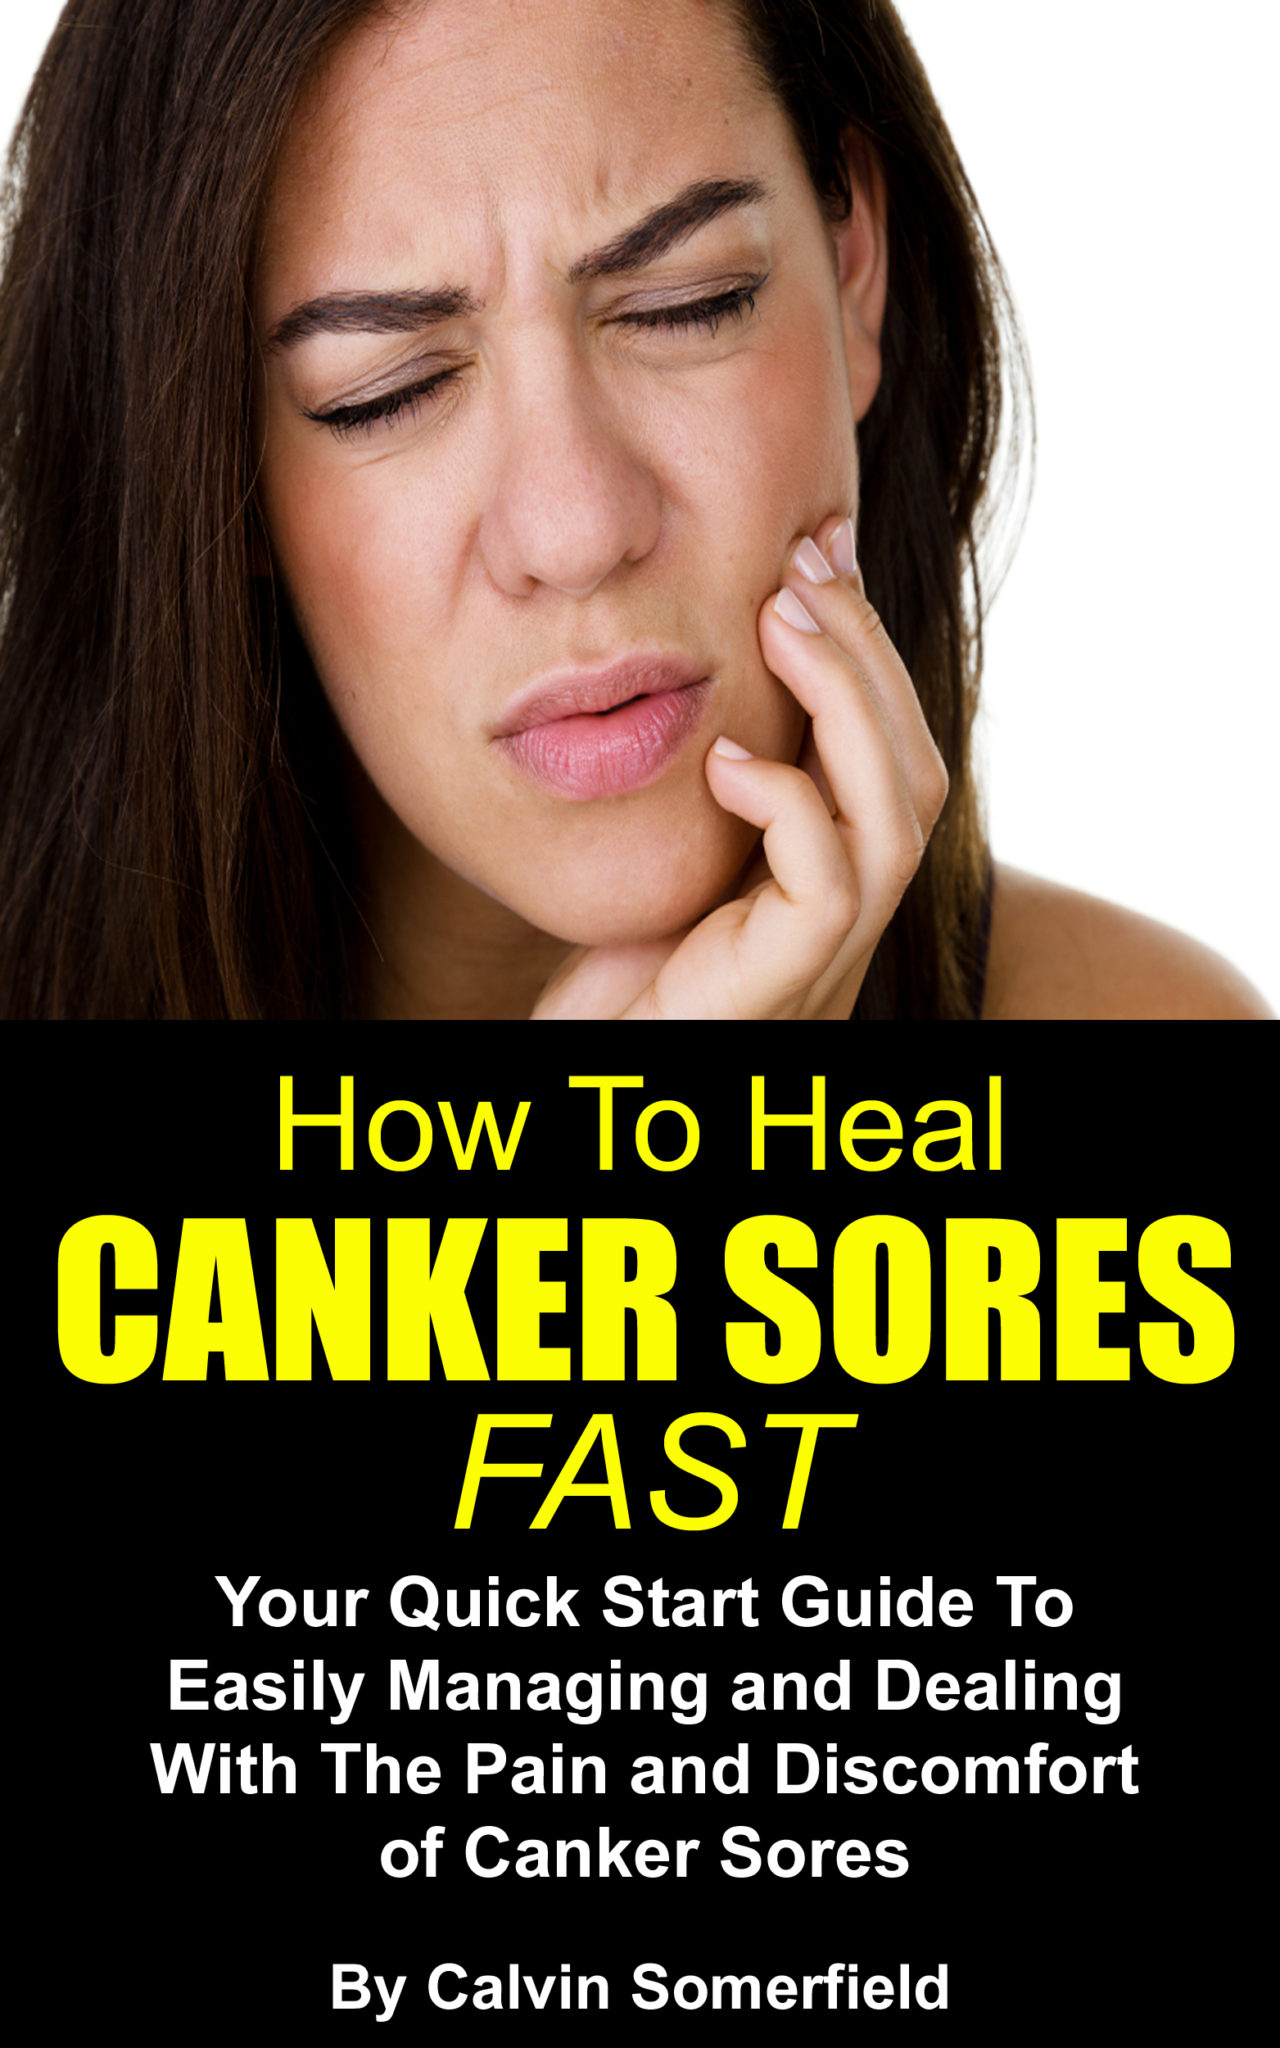 How To Heal Canker Sores Fast: Your Quick Start Guide to Easily Managing and Dealing With the Pain and Discomfort of Canker Sores by Calvin Somerfield